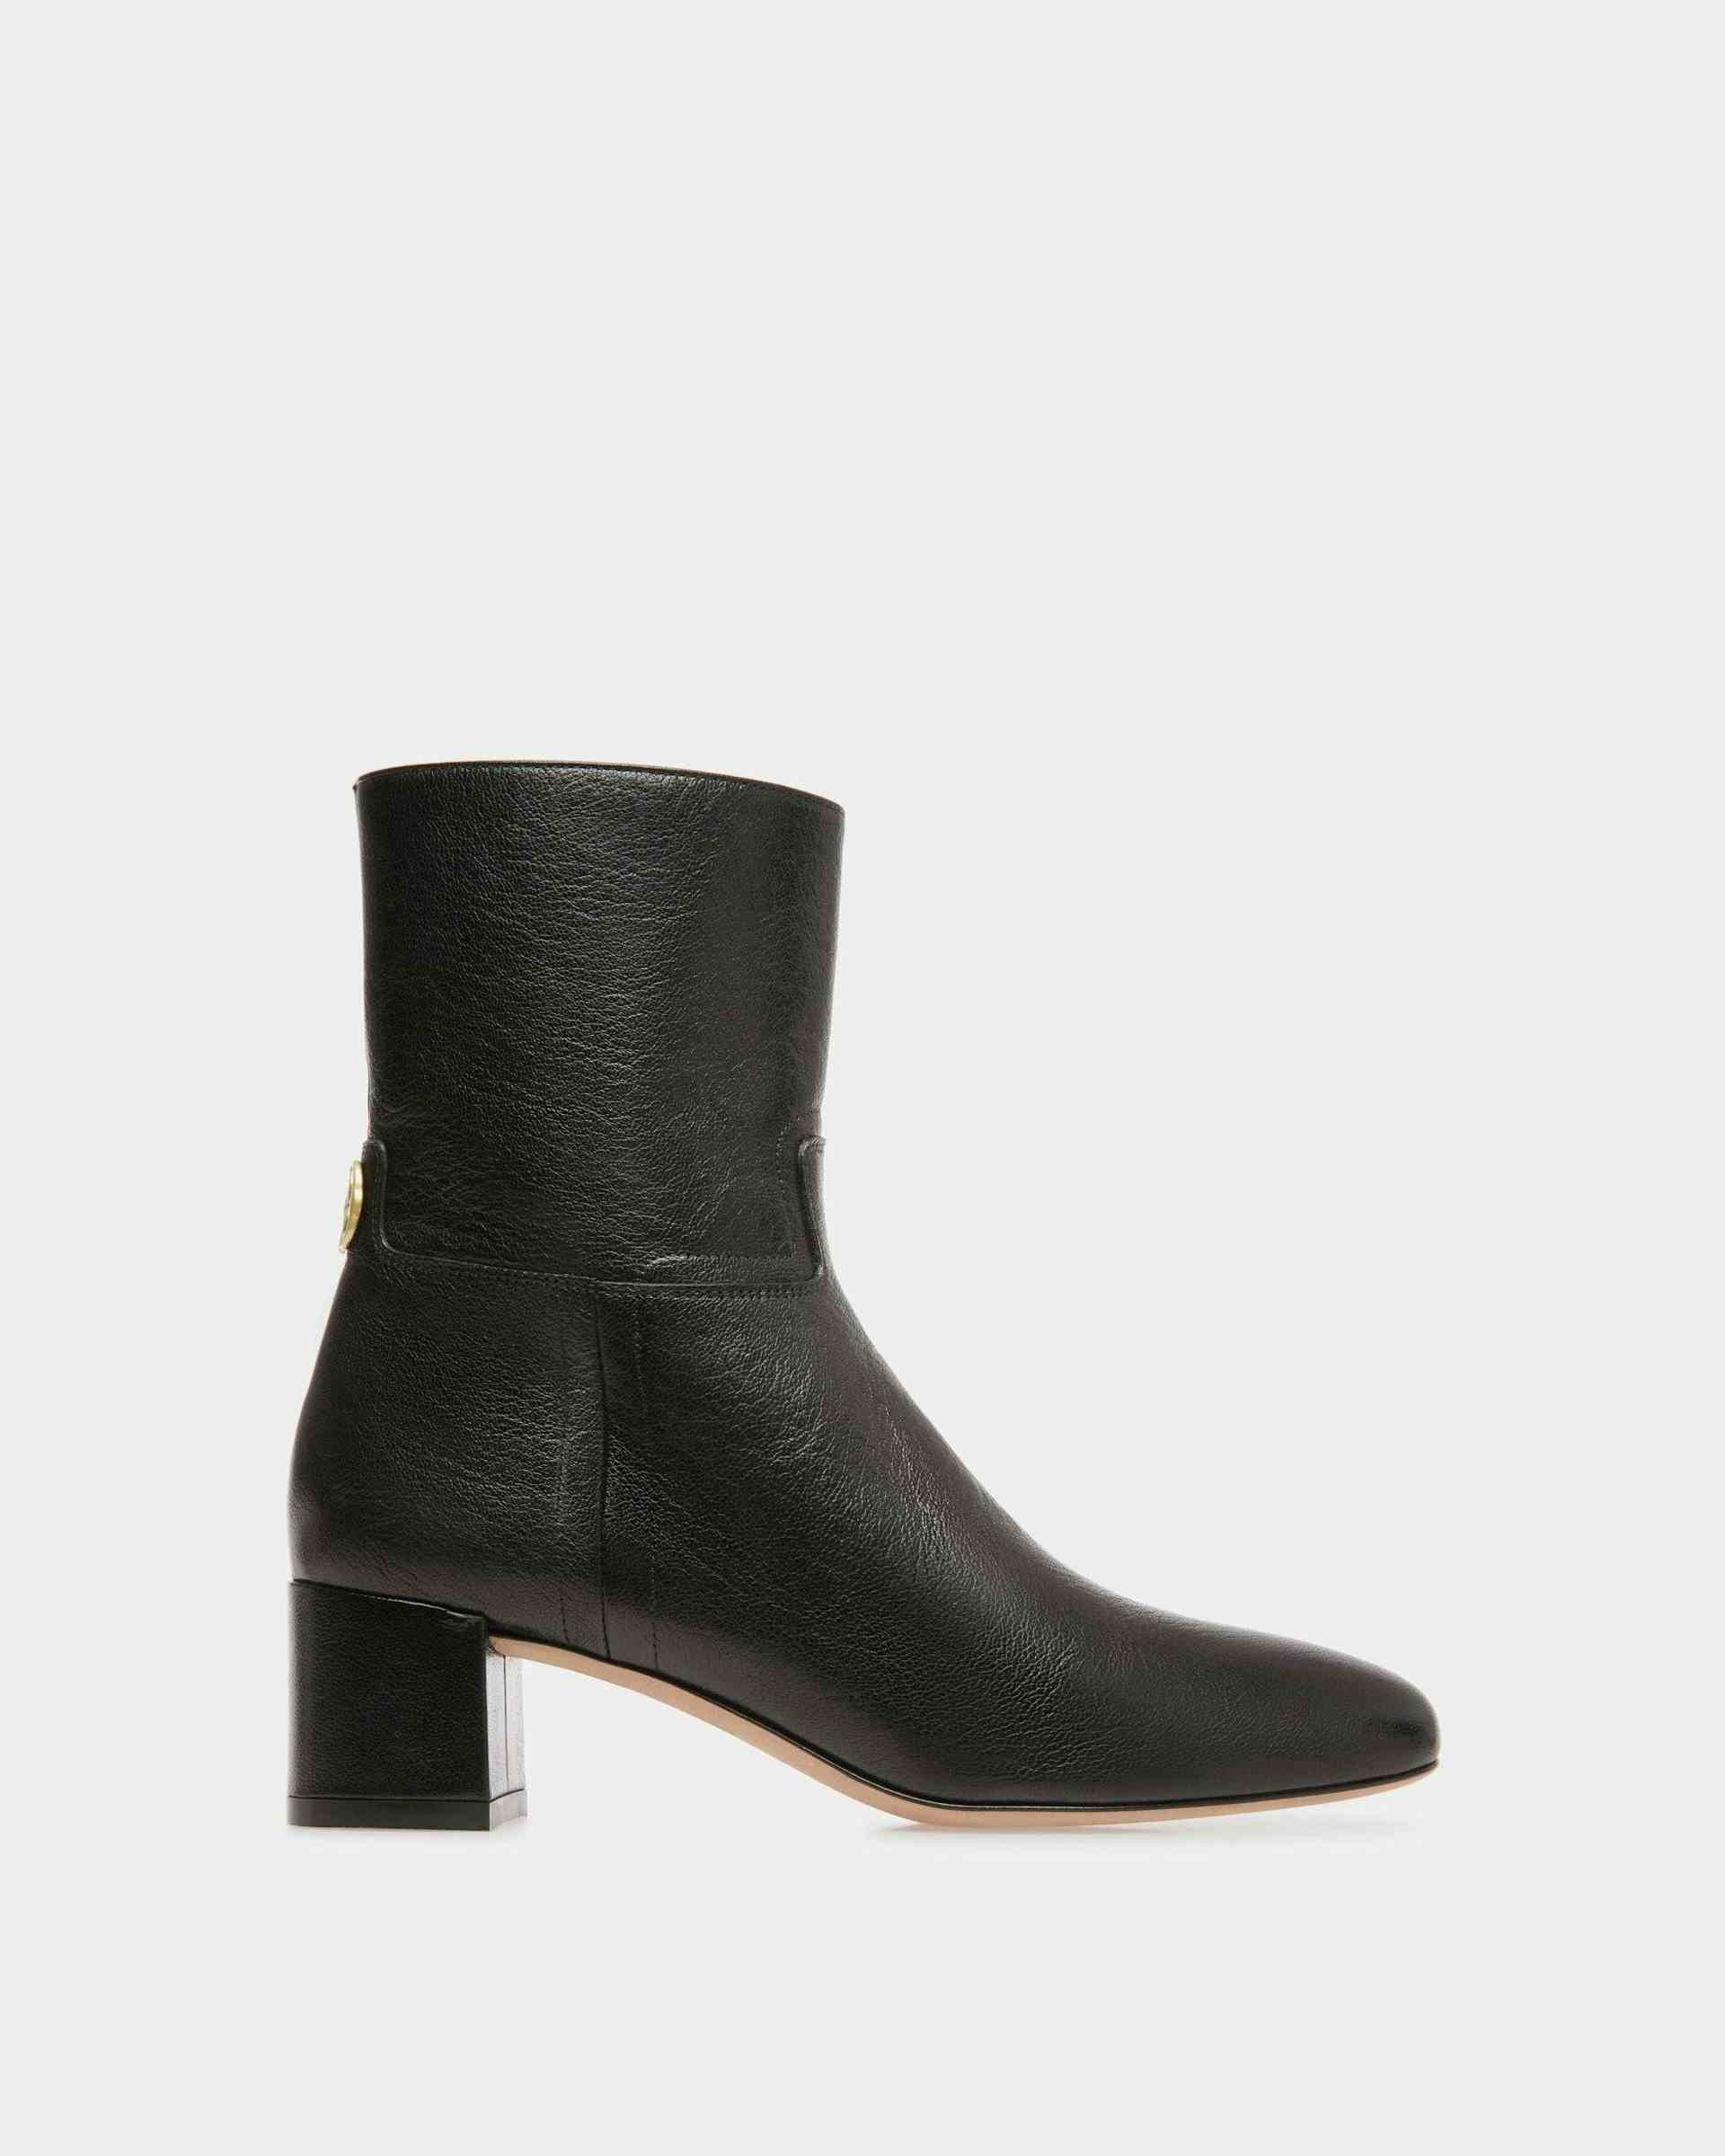 Daily Emblem Booties In Black Leather - Women's - Bally